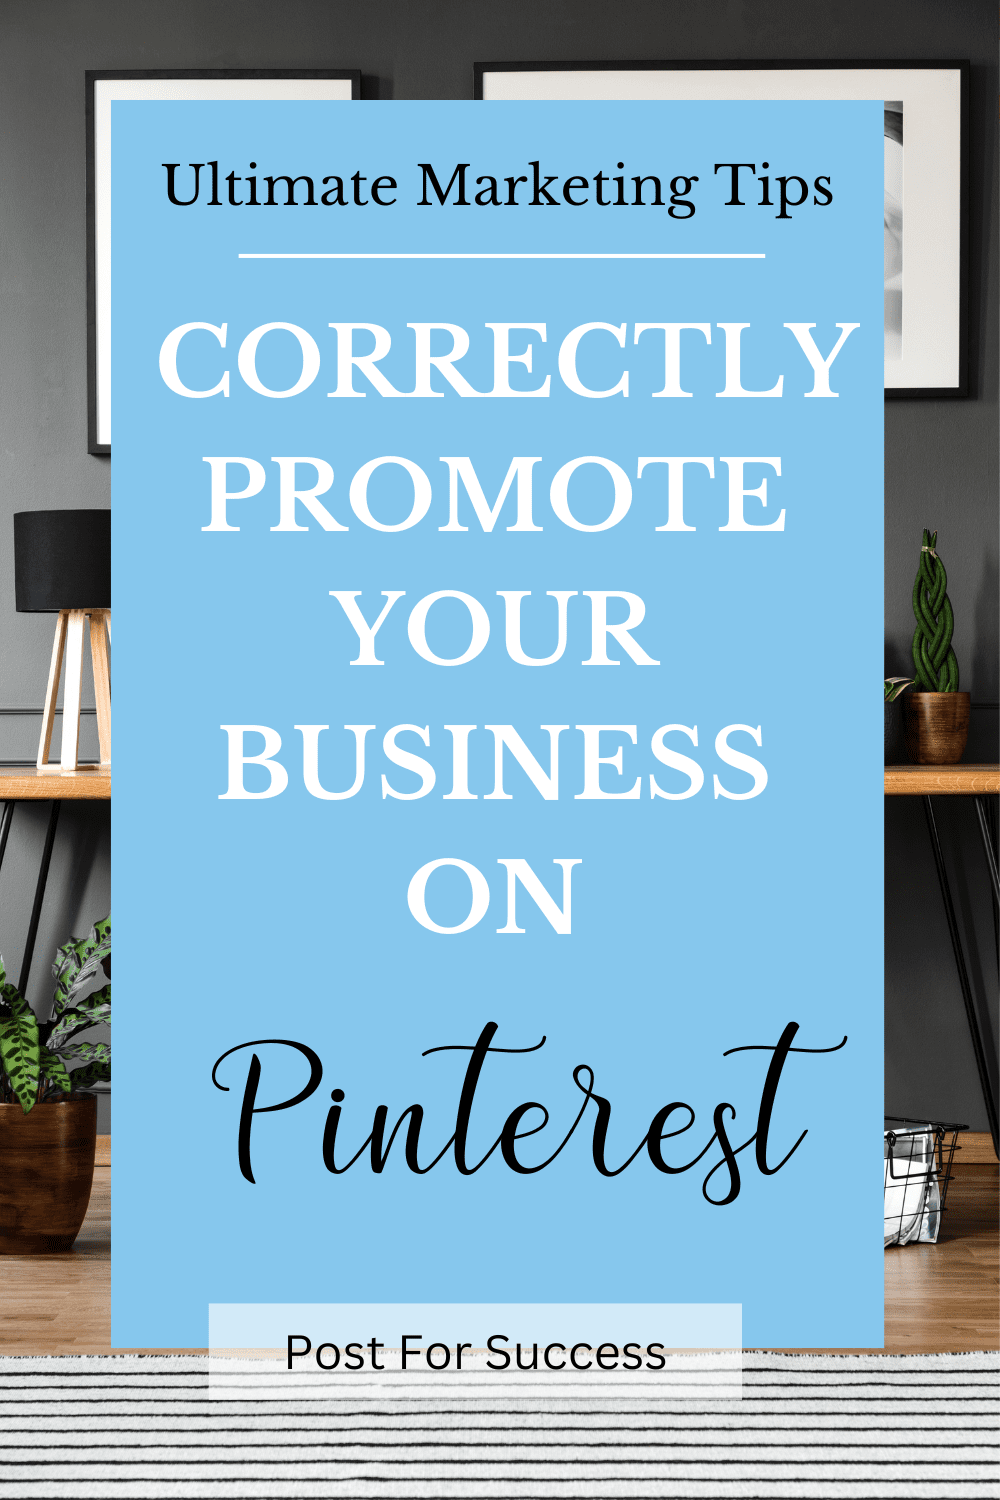 03 CORRECTLY PROMOTE YOUR BUSINESS ON PINTEREST